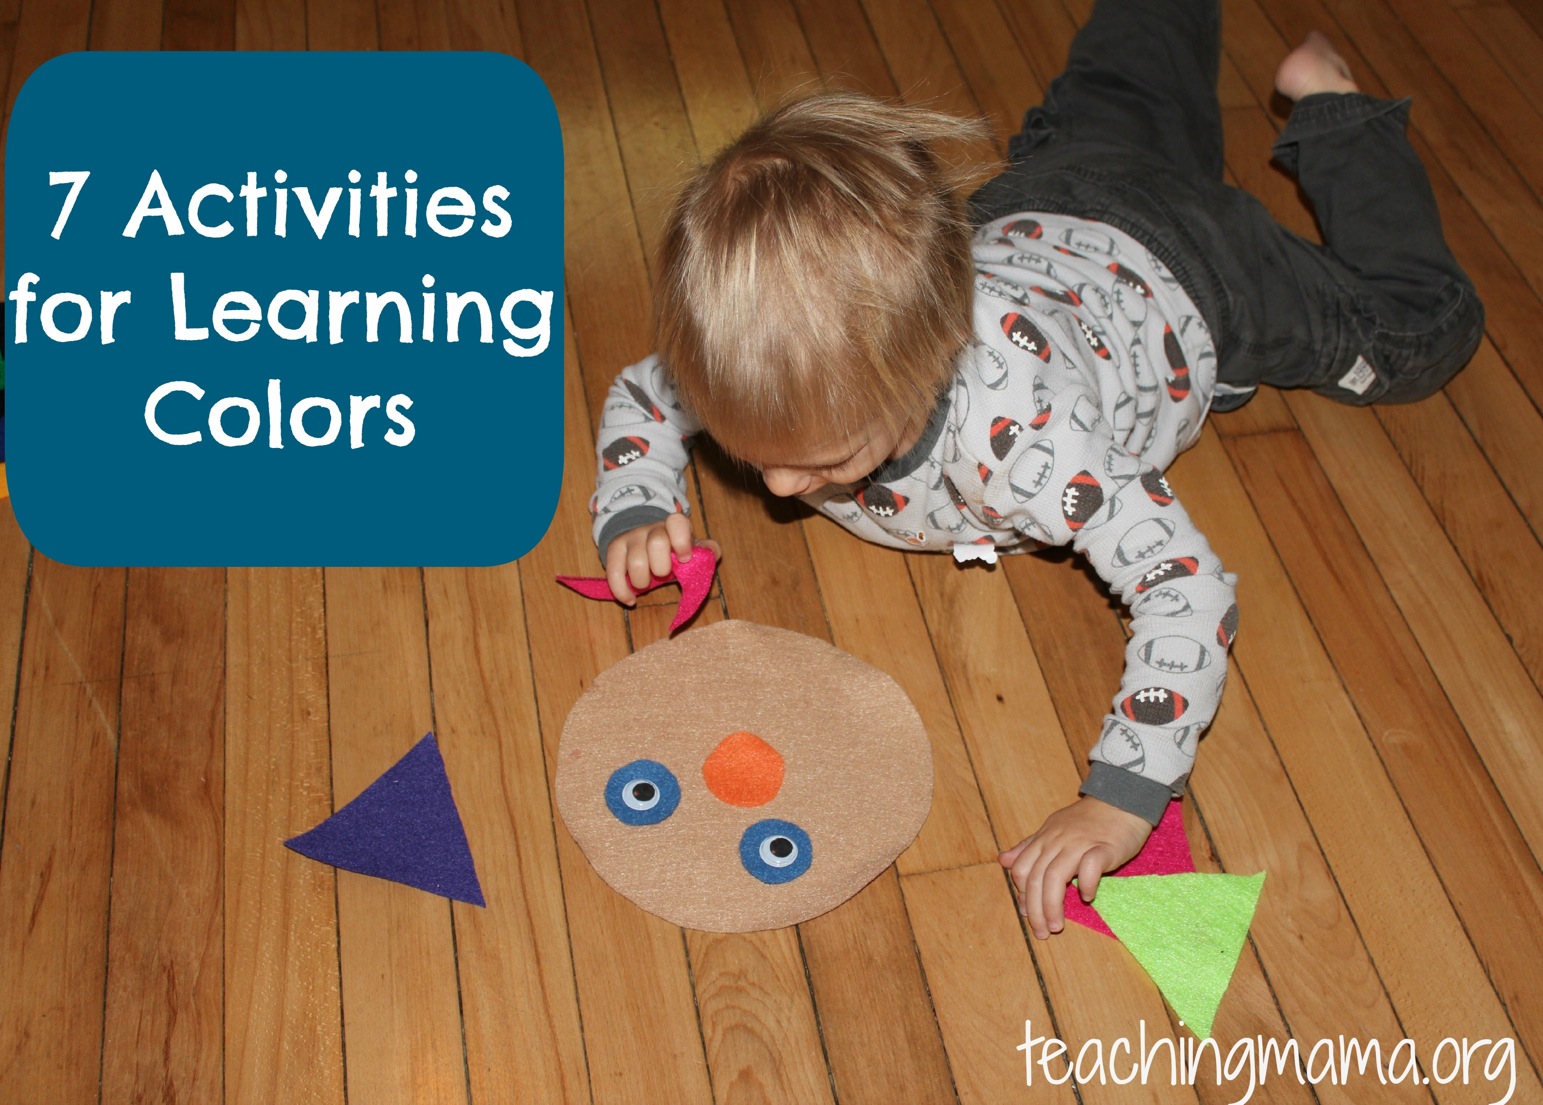 7 Activities for Learning Colors